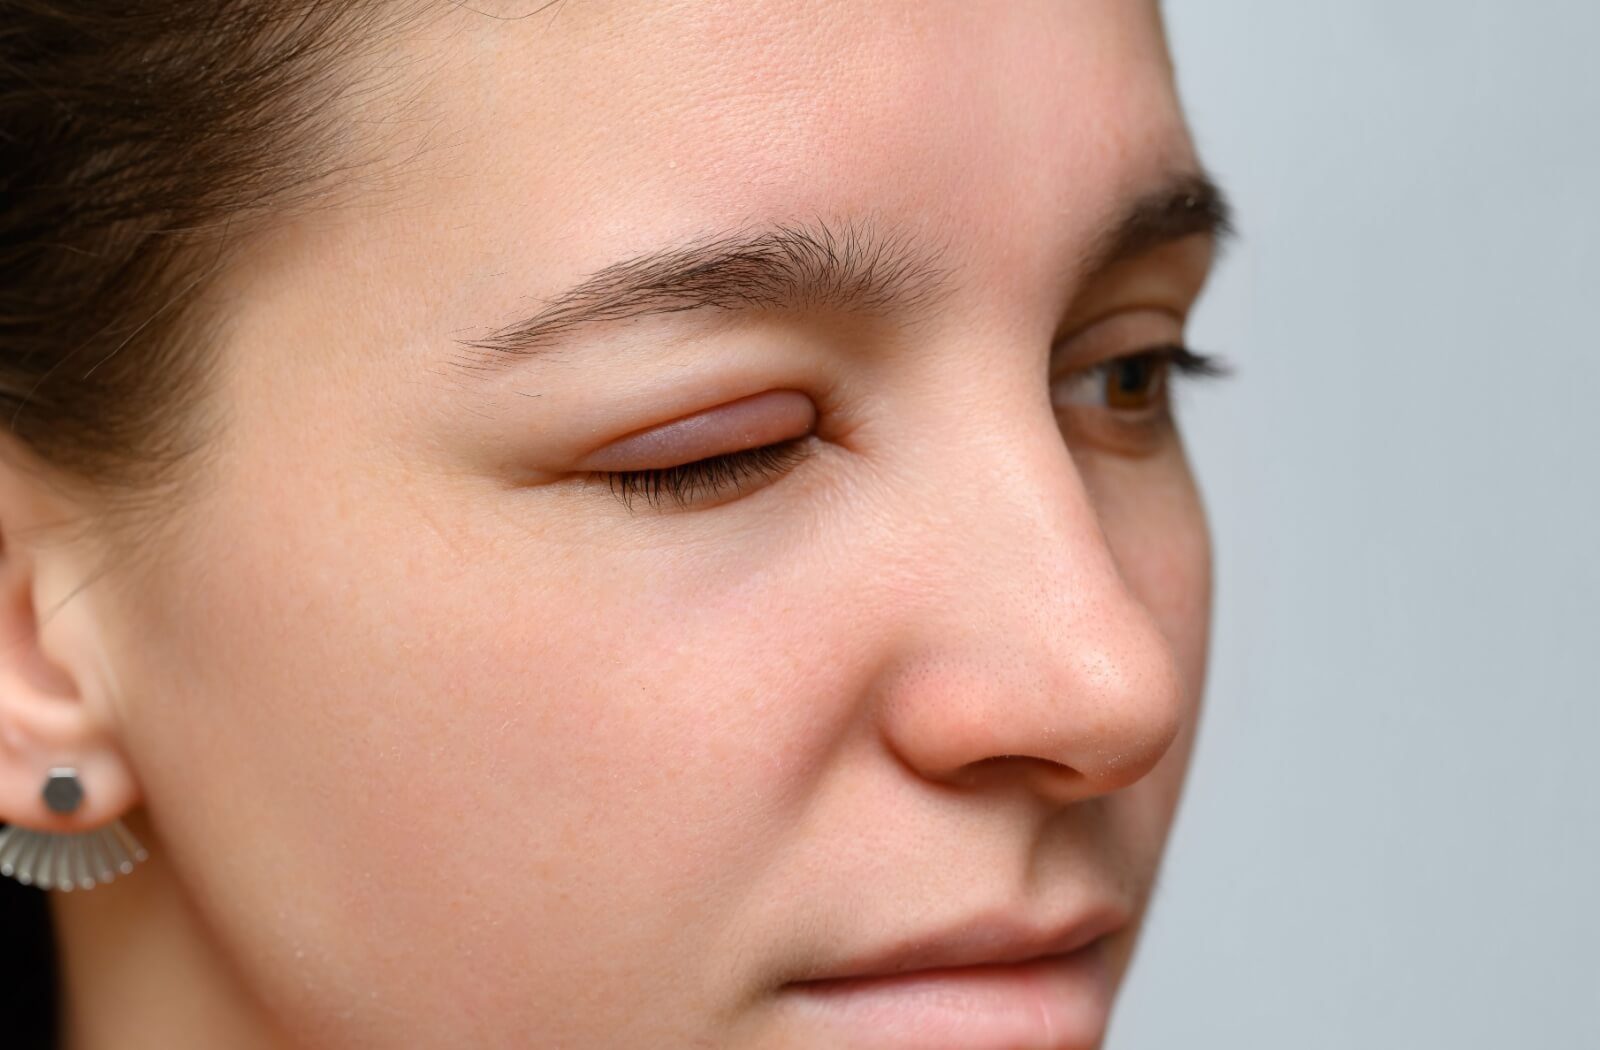 A close-up of a woman's swollen right eye.